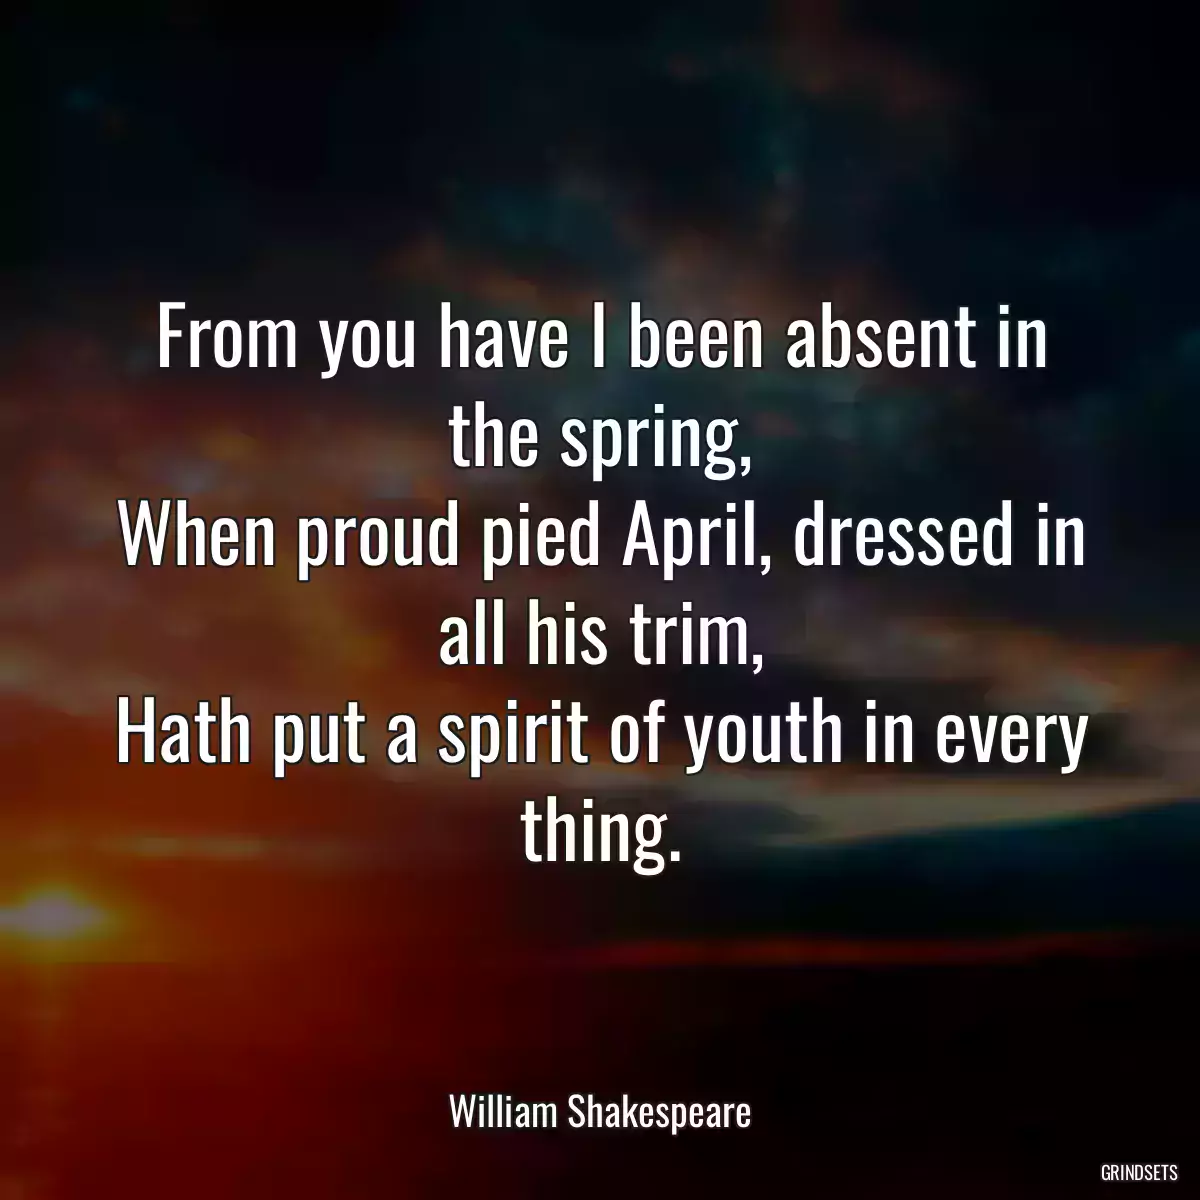 From you have I been absent in the spring,
When proud pied April, dressed in all his trim,
Hath put a spirit of youth in every thing.